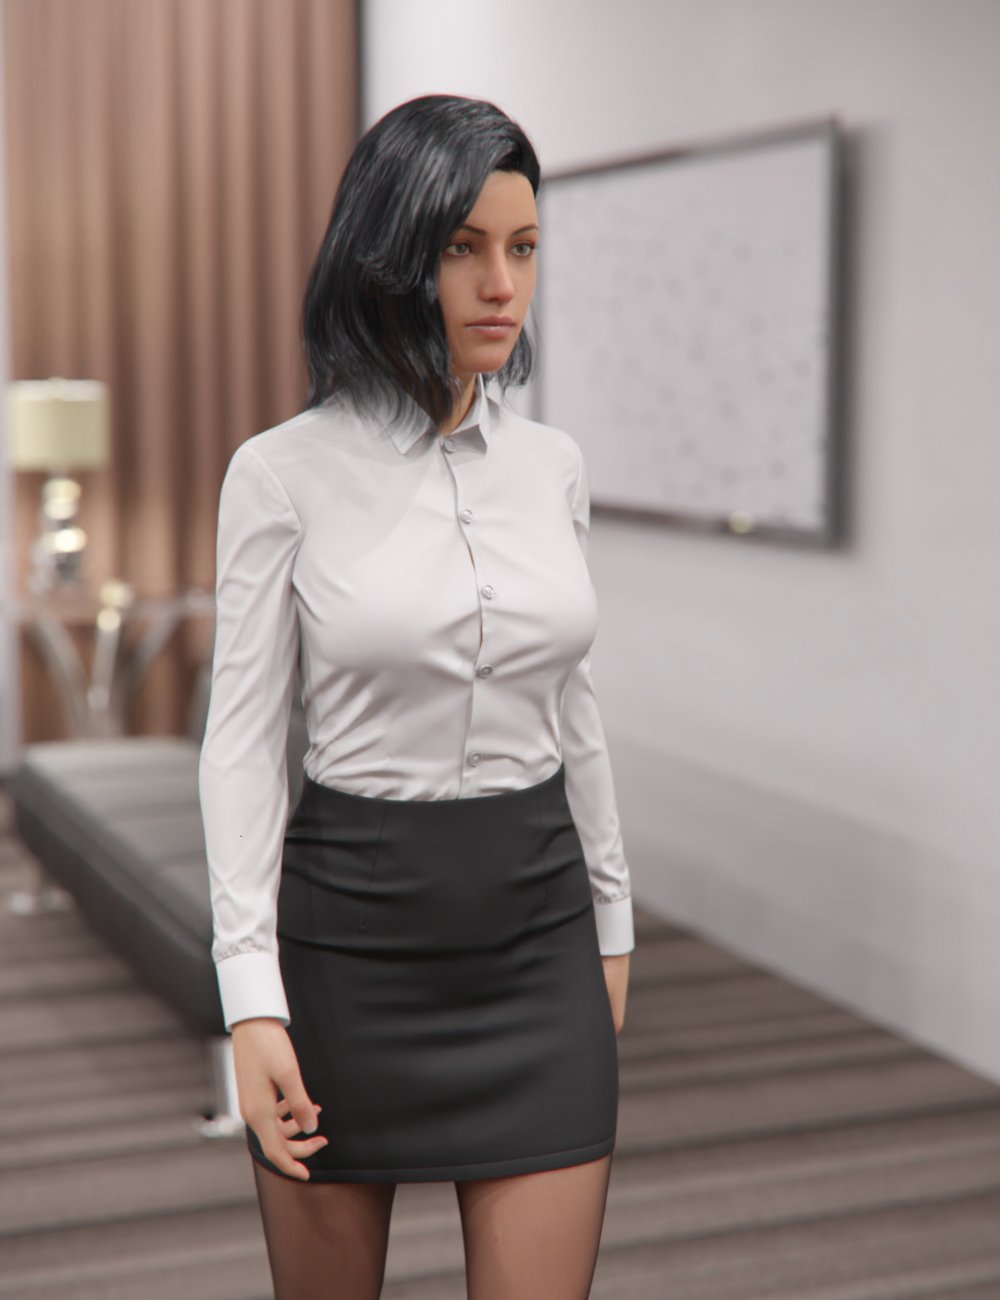 dForce Office Lady Suit for Genesis 8 and 8.1 Females by: Jason Fang, 3D Models by Daz 3D